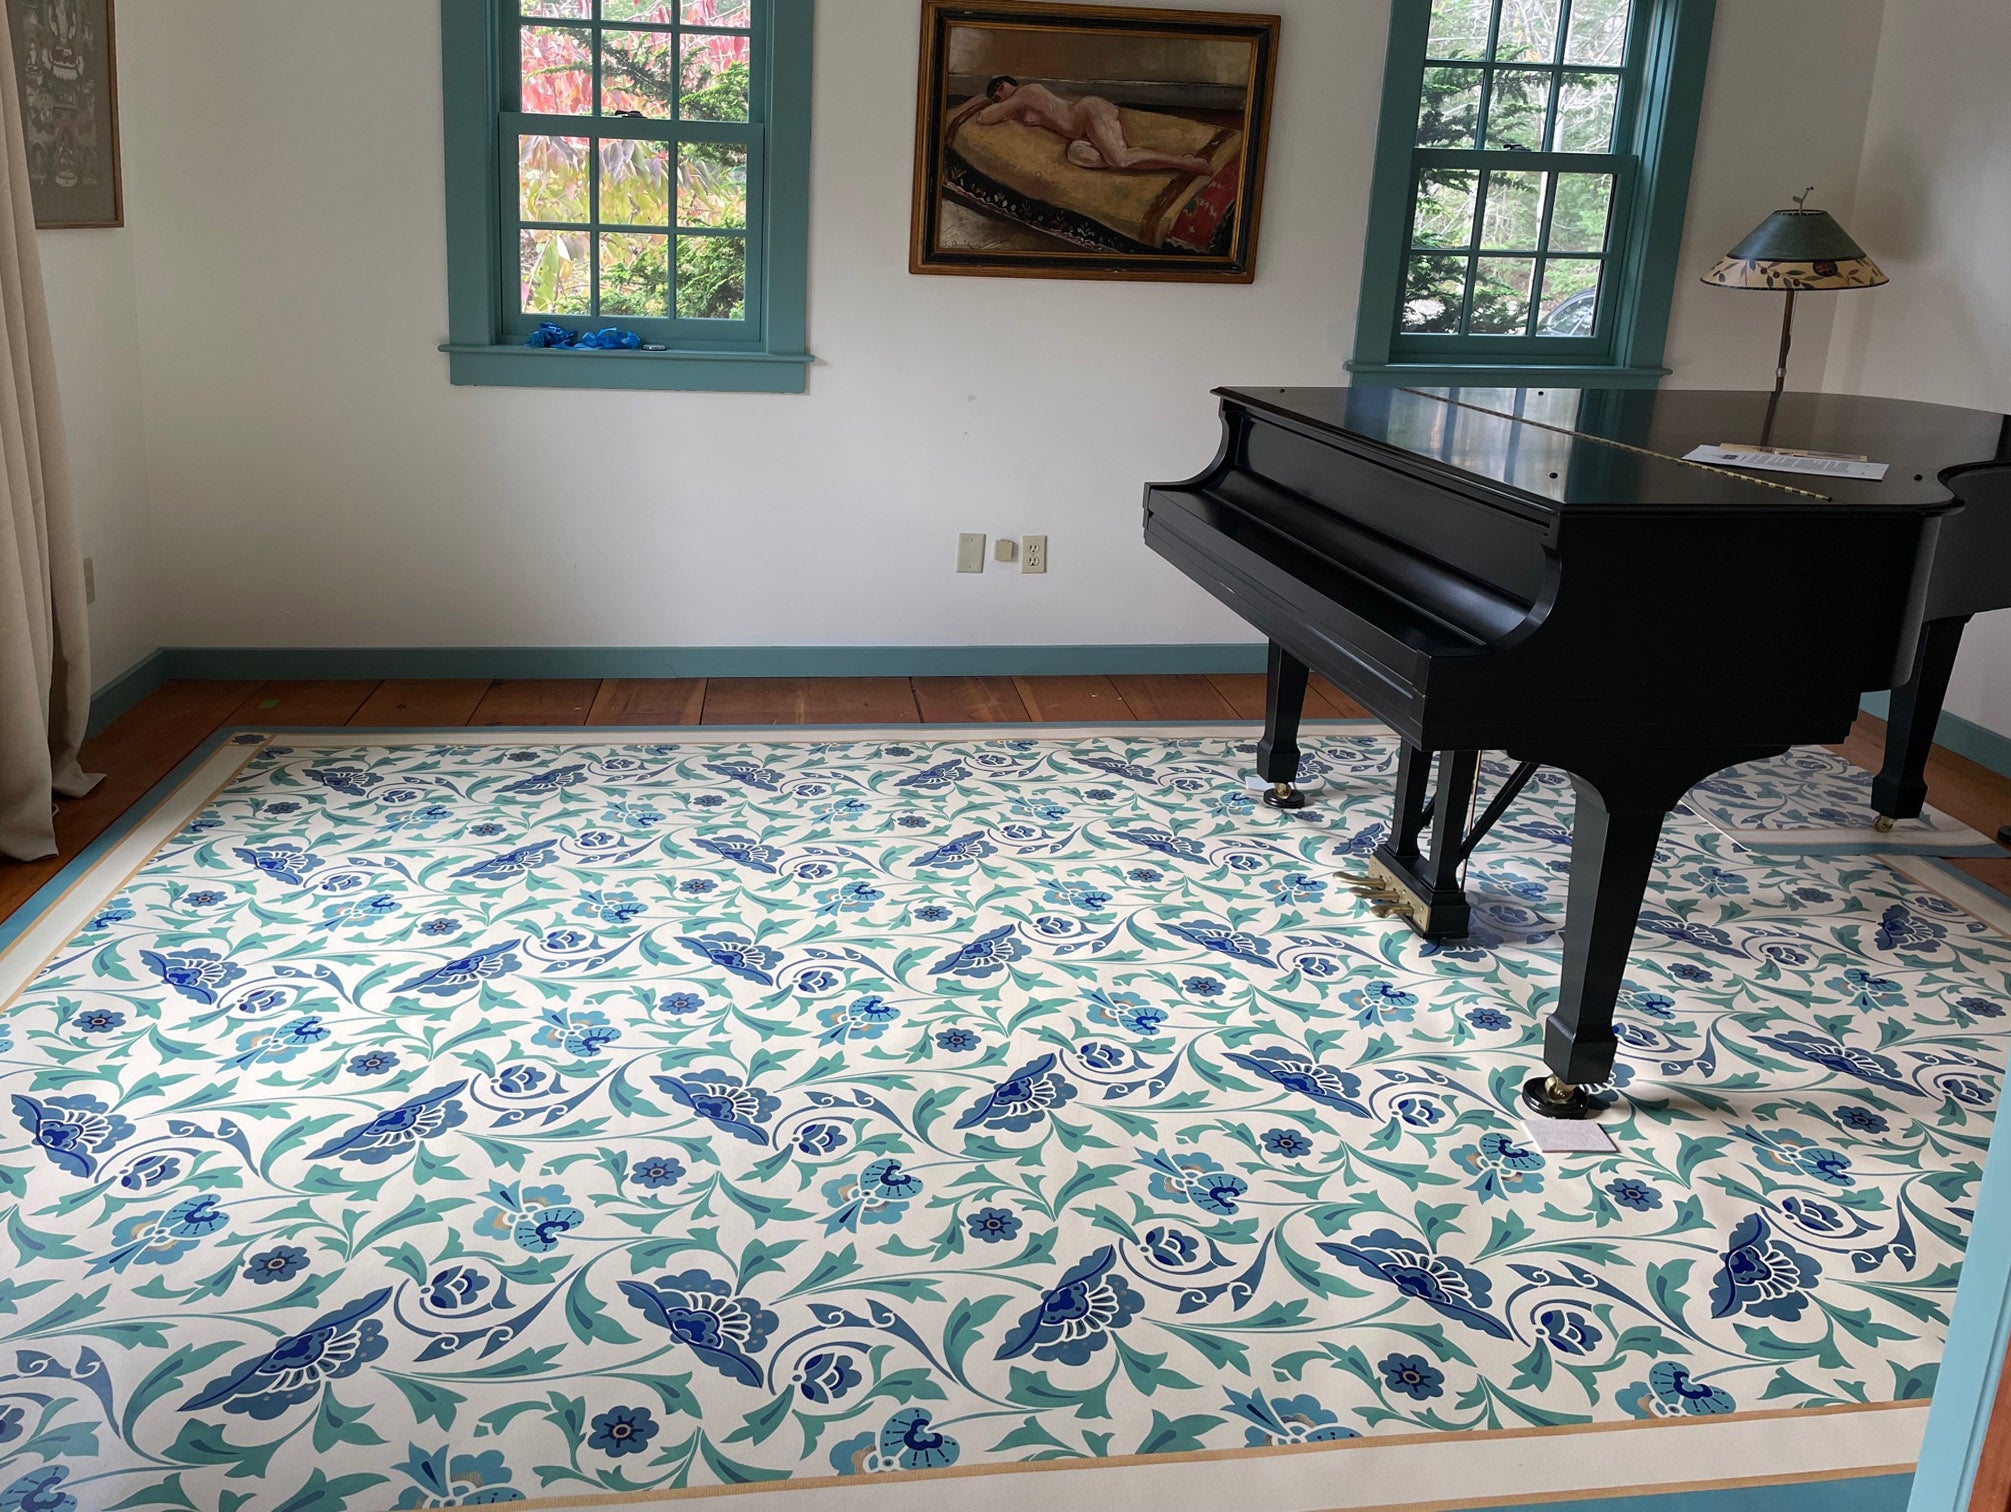 In-situ photo of this All-Over-Floral floorcloth in the music room of it's home in Northern Maine.